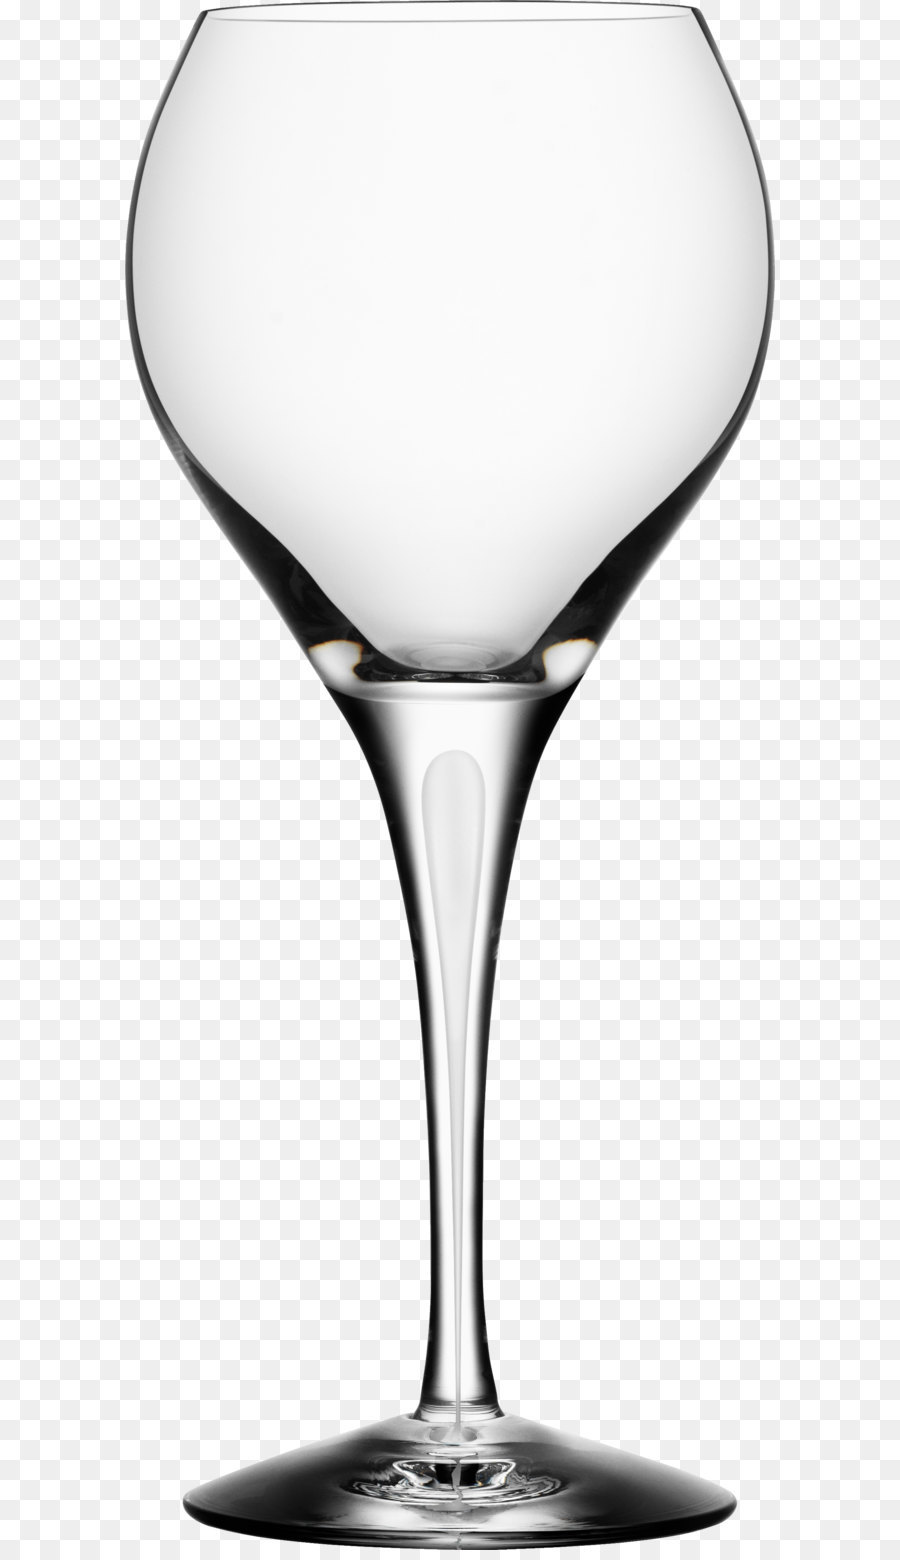 Wine glass Cup - Empty Wine Glass Png Image png download - 1701*4055 - Free Transparent Cocktail png Download.